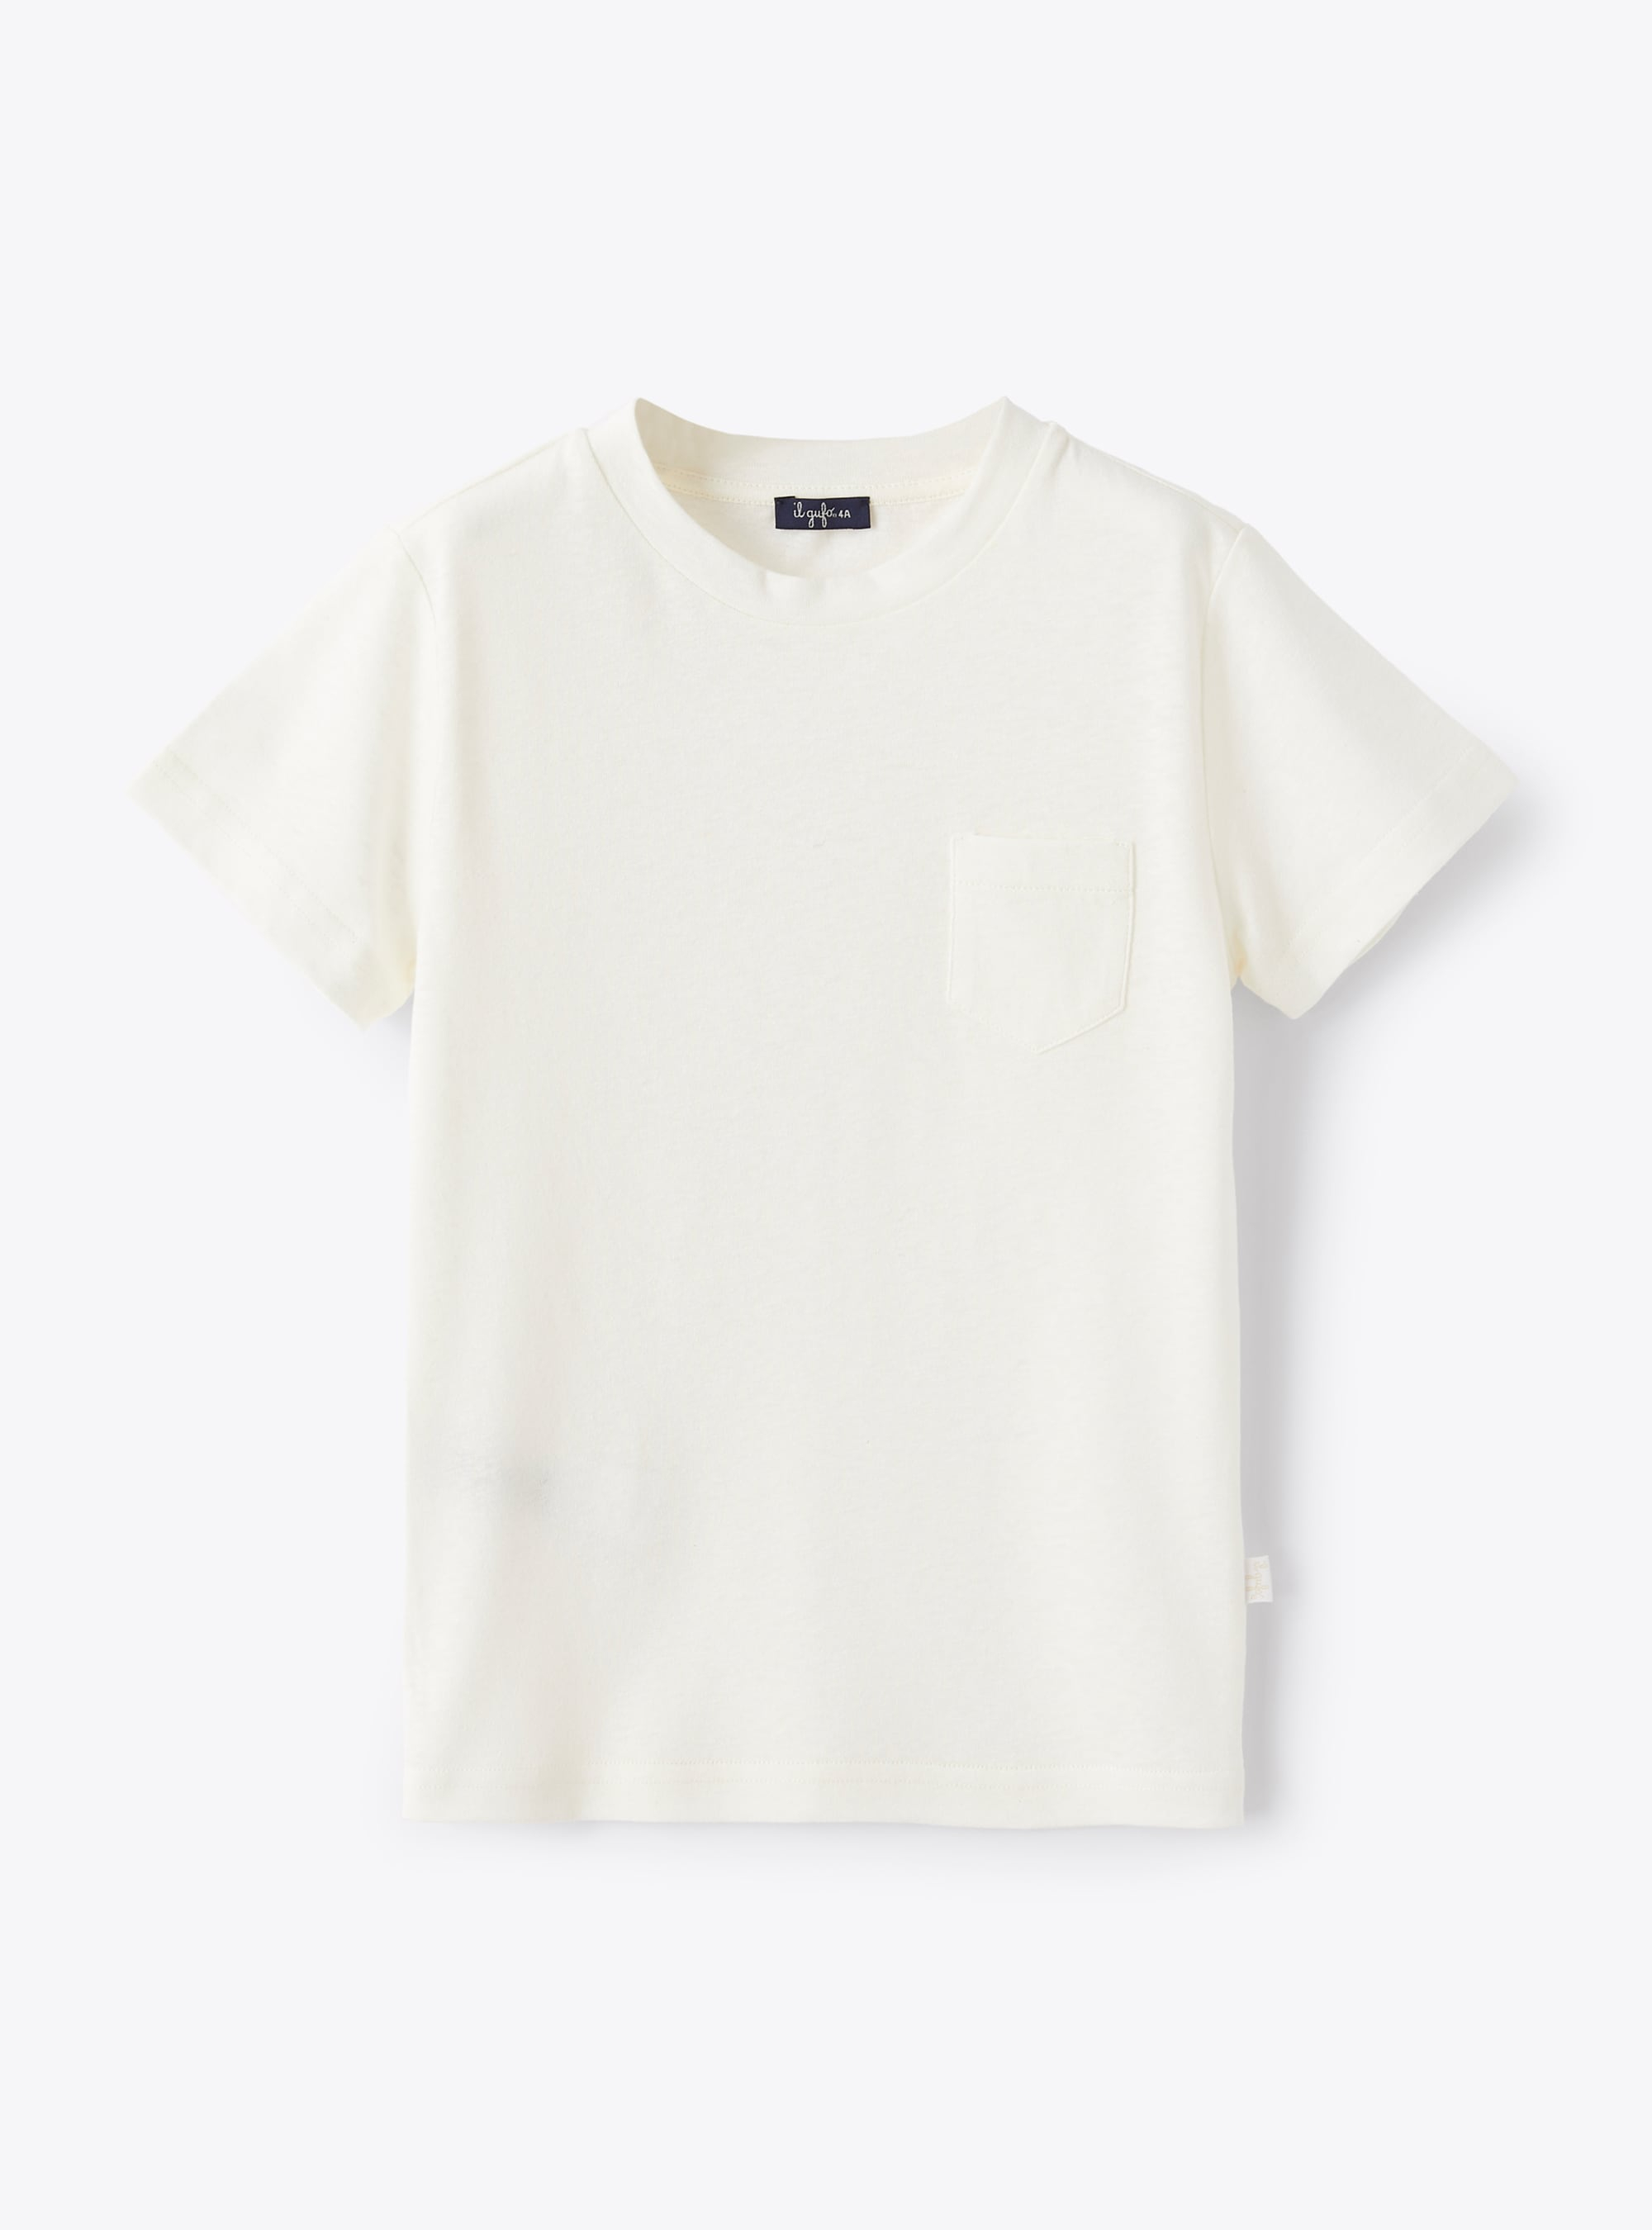 White t-shirt in cotton and linen - T-shirts - Il Gufo